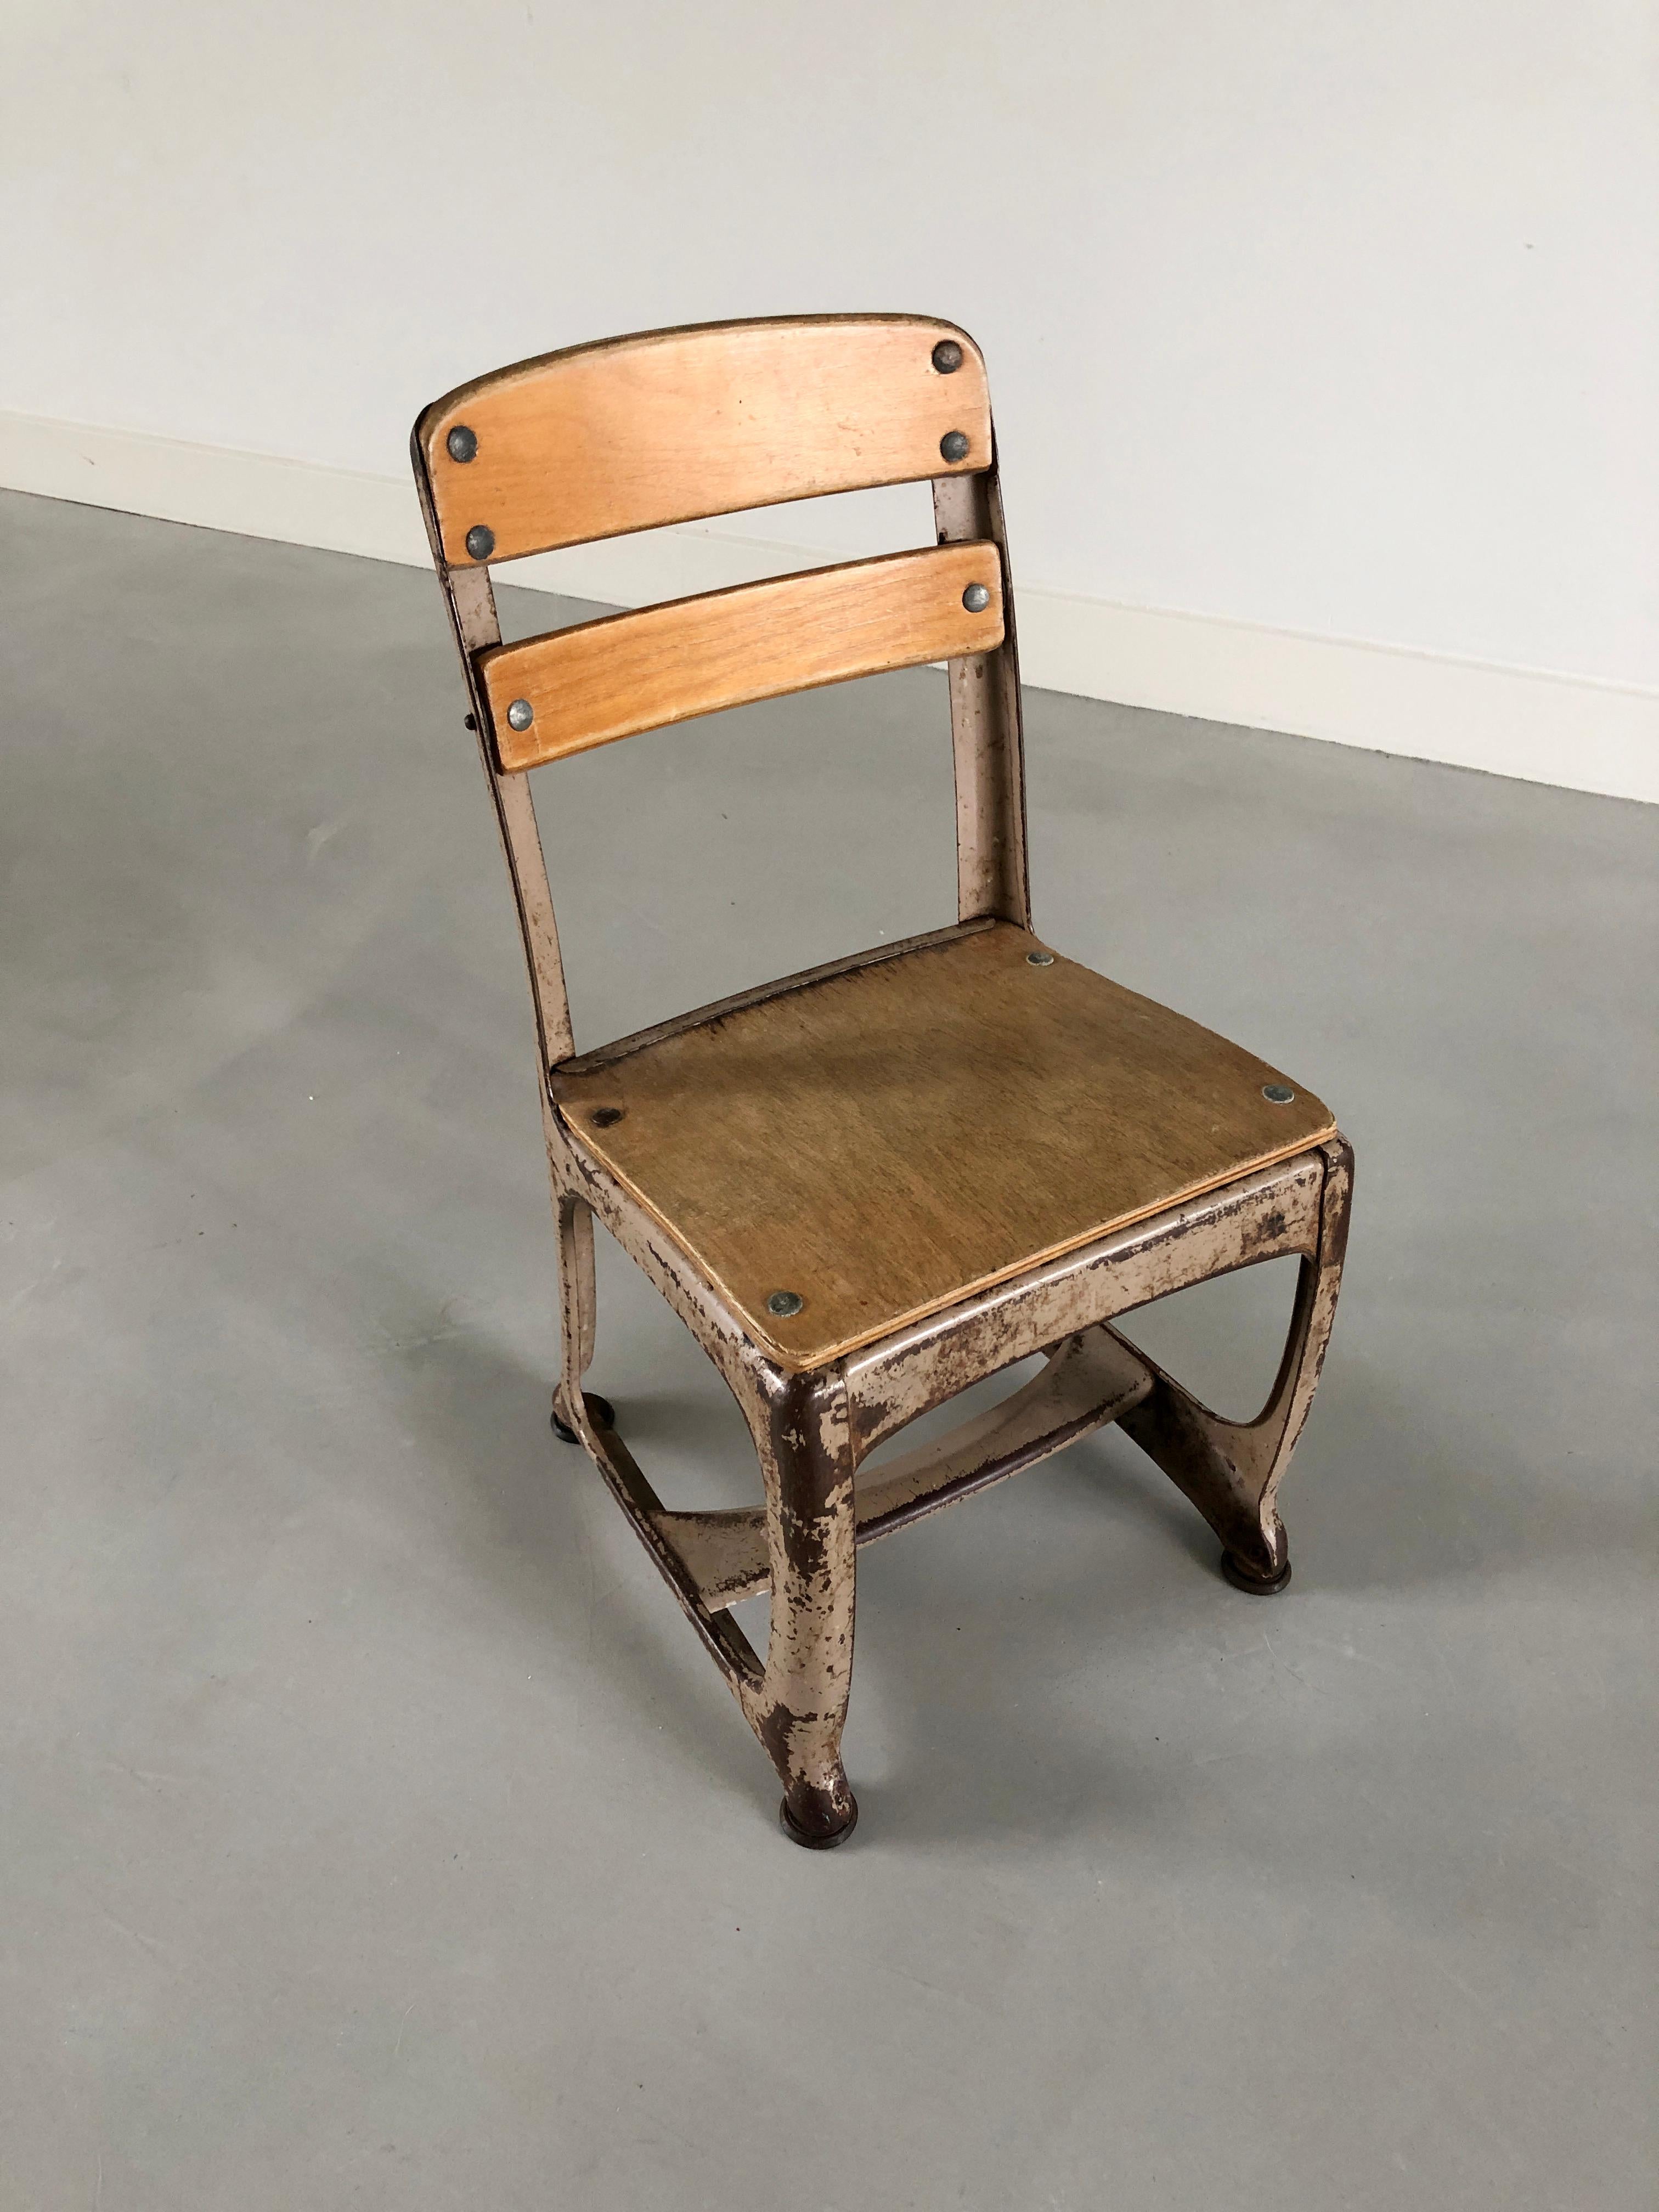 Highly original Industrial Style childs chair By The American Seating Company Of Grand Rapids, Michigan USA - No.11 - Model 368 - 
D-PATENT 126710 stamped on front - Company stamp under seat.
The design and development of the Envoy chair resulted